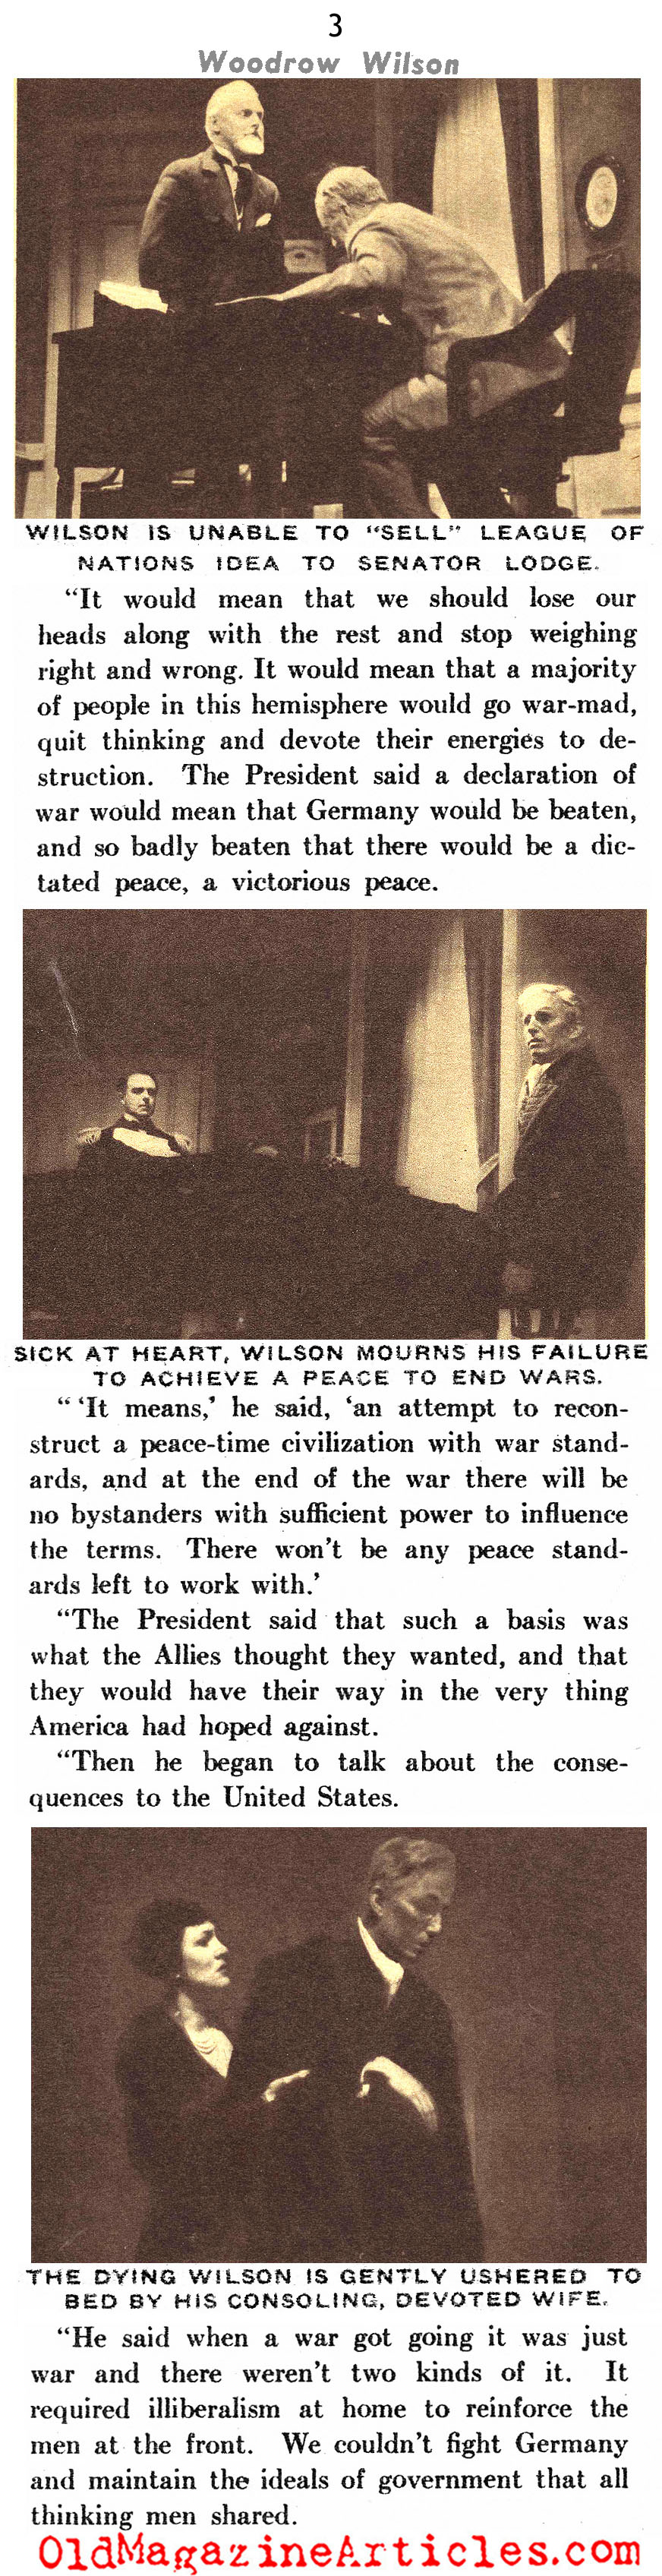 Wilson On The Eve of War (Pic Magazine, 1942)